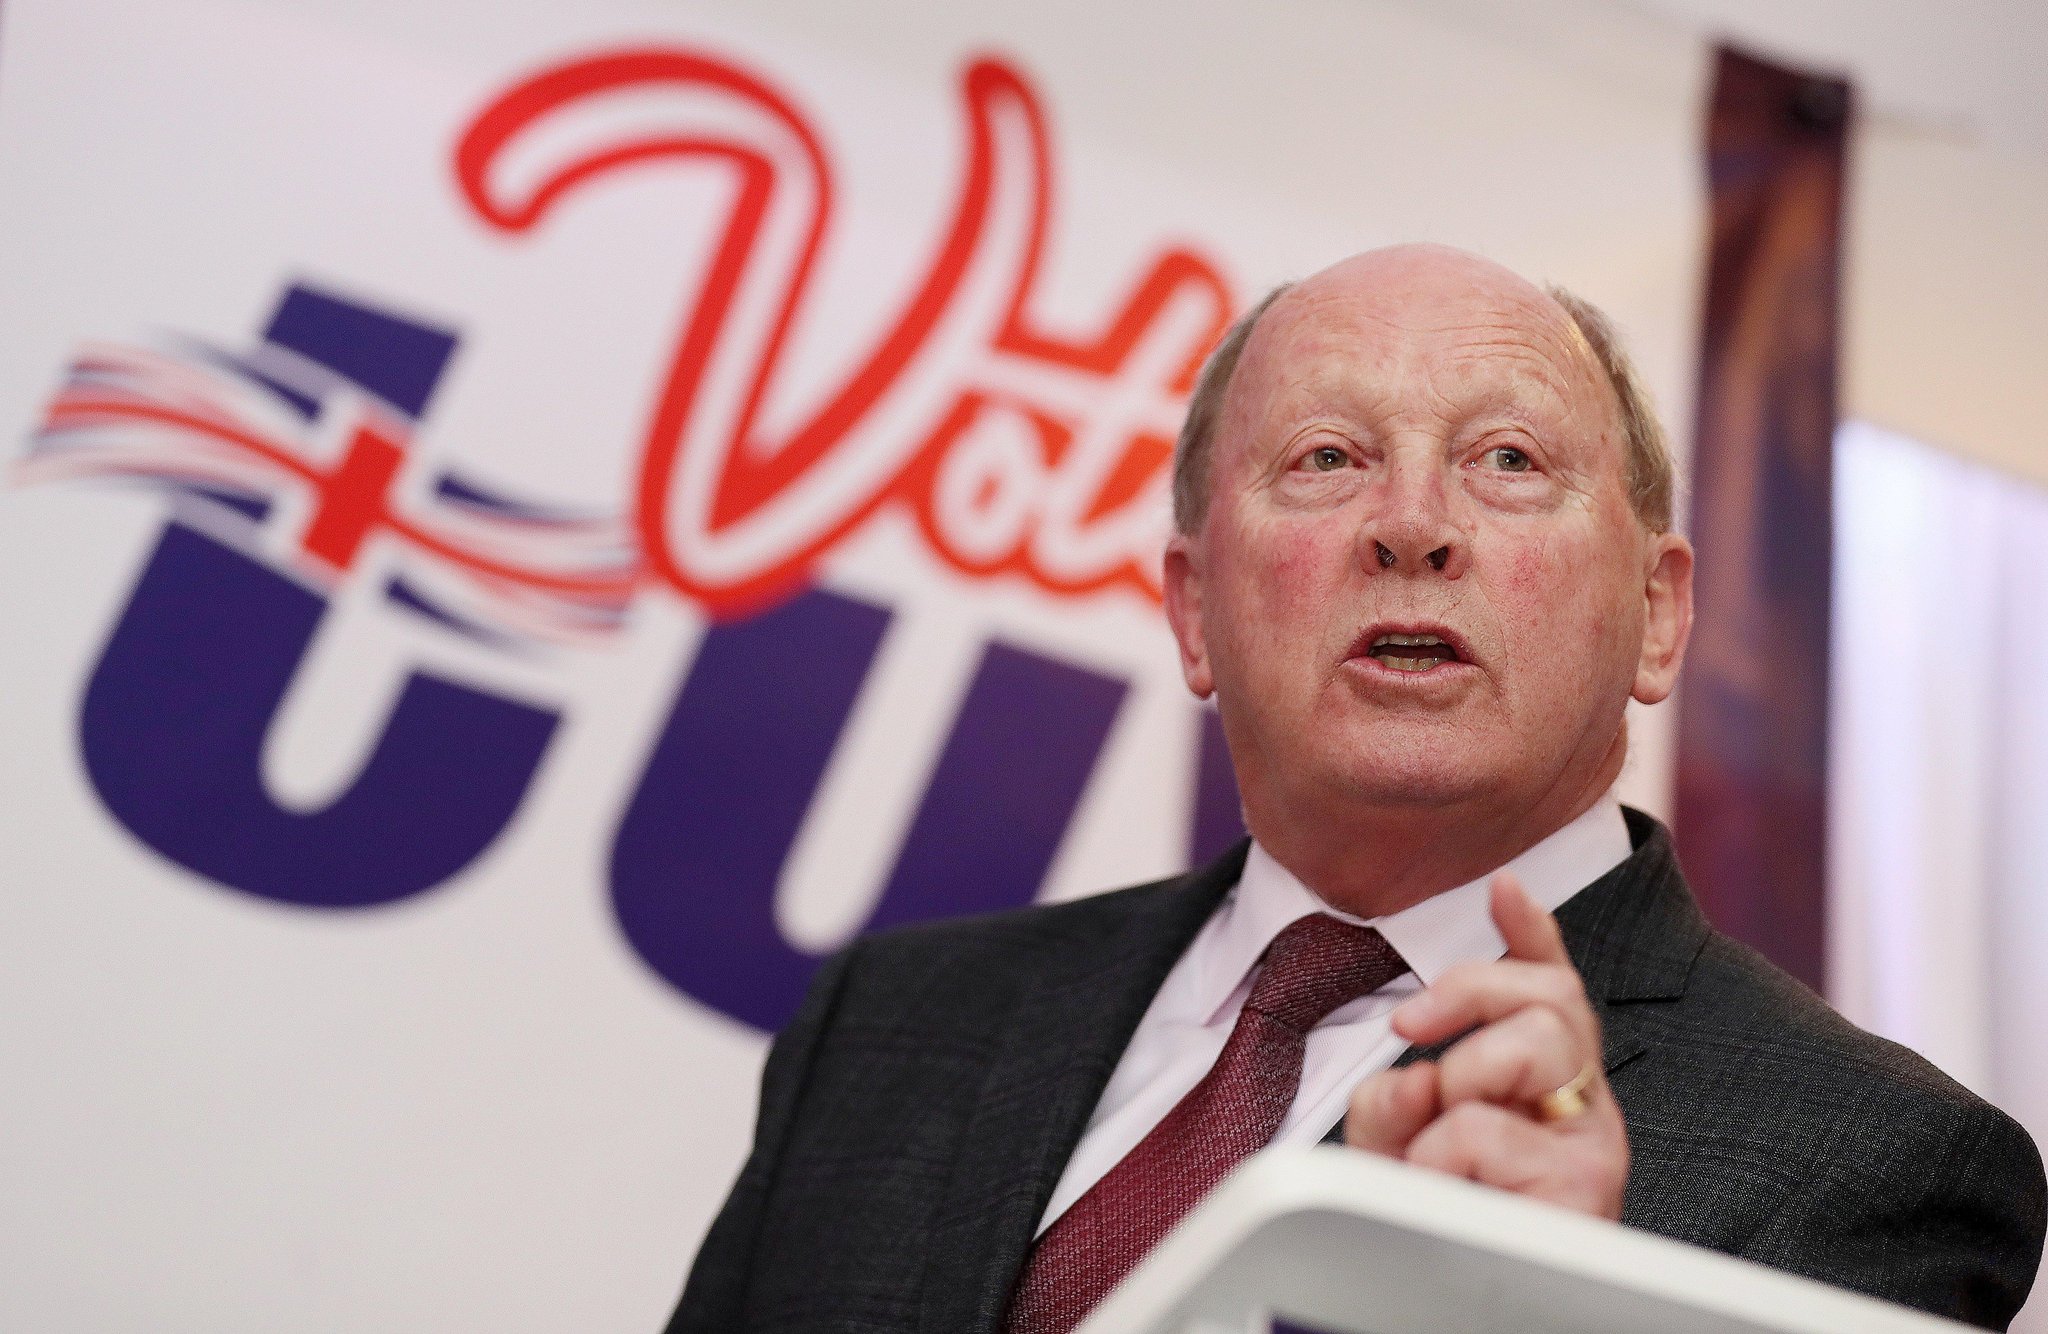 DUP defector Wells in tune with our thinking: TUV leader Allister